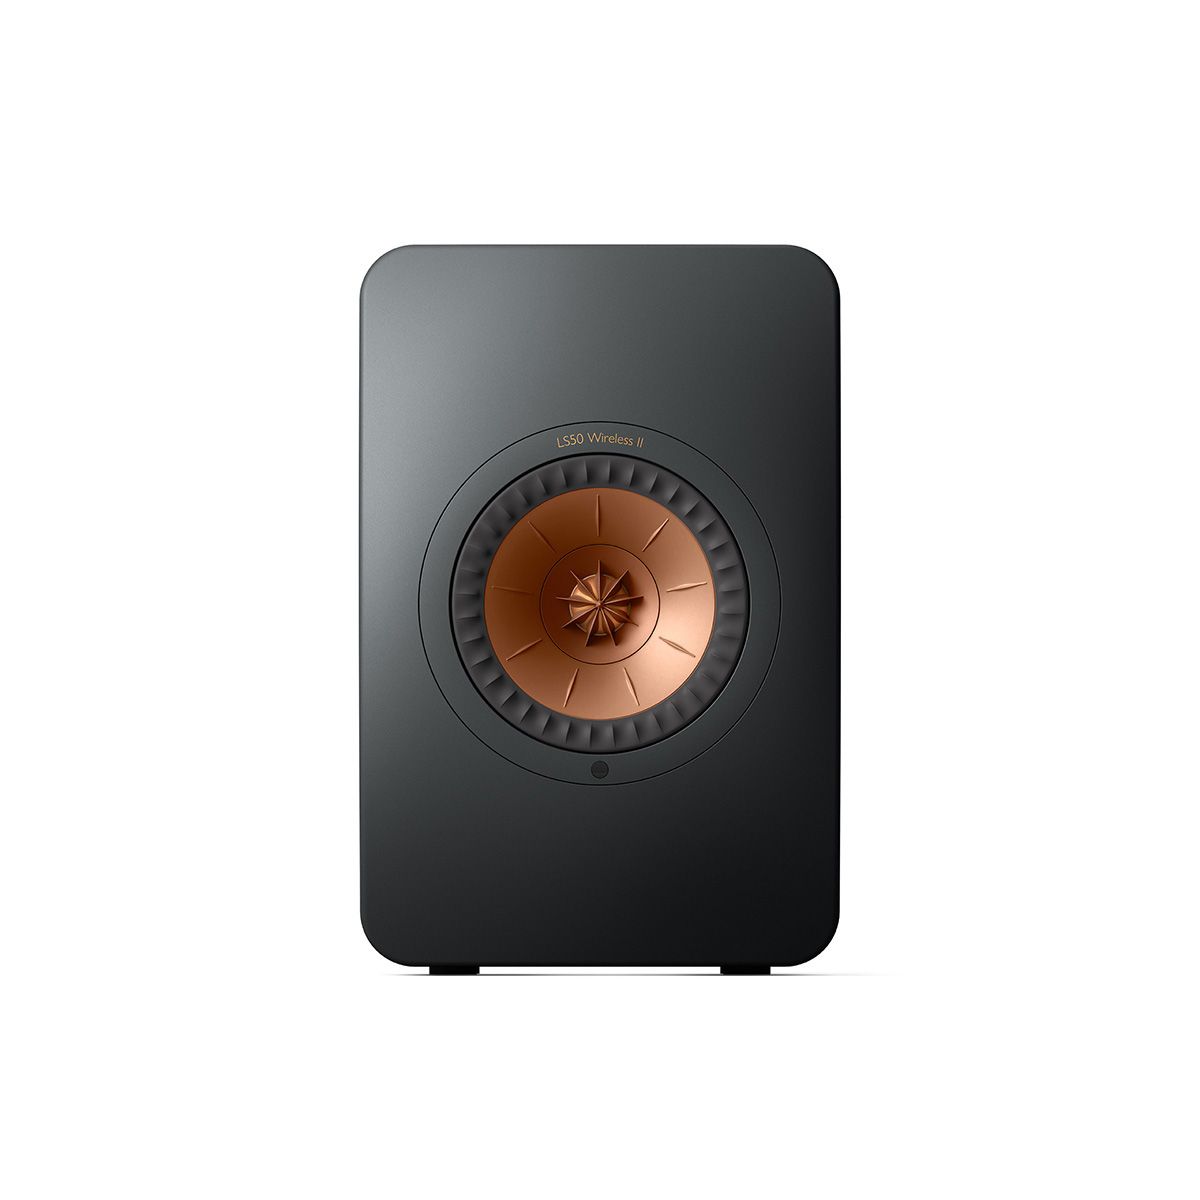 KEF LS50 Wireless II High Resolution Music System - Carbon Black - Pair - front view of single without grille